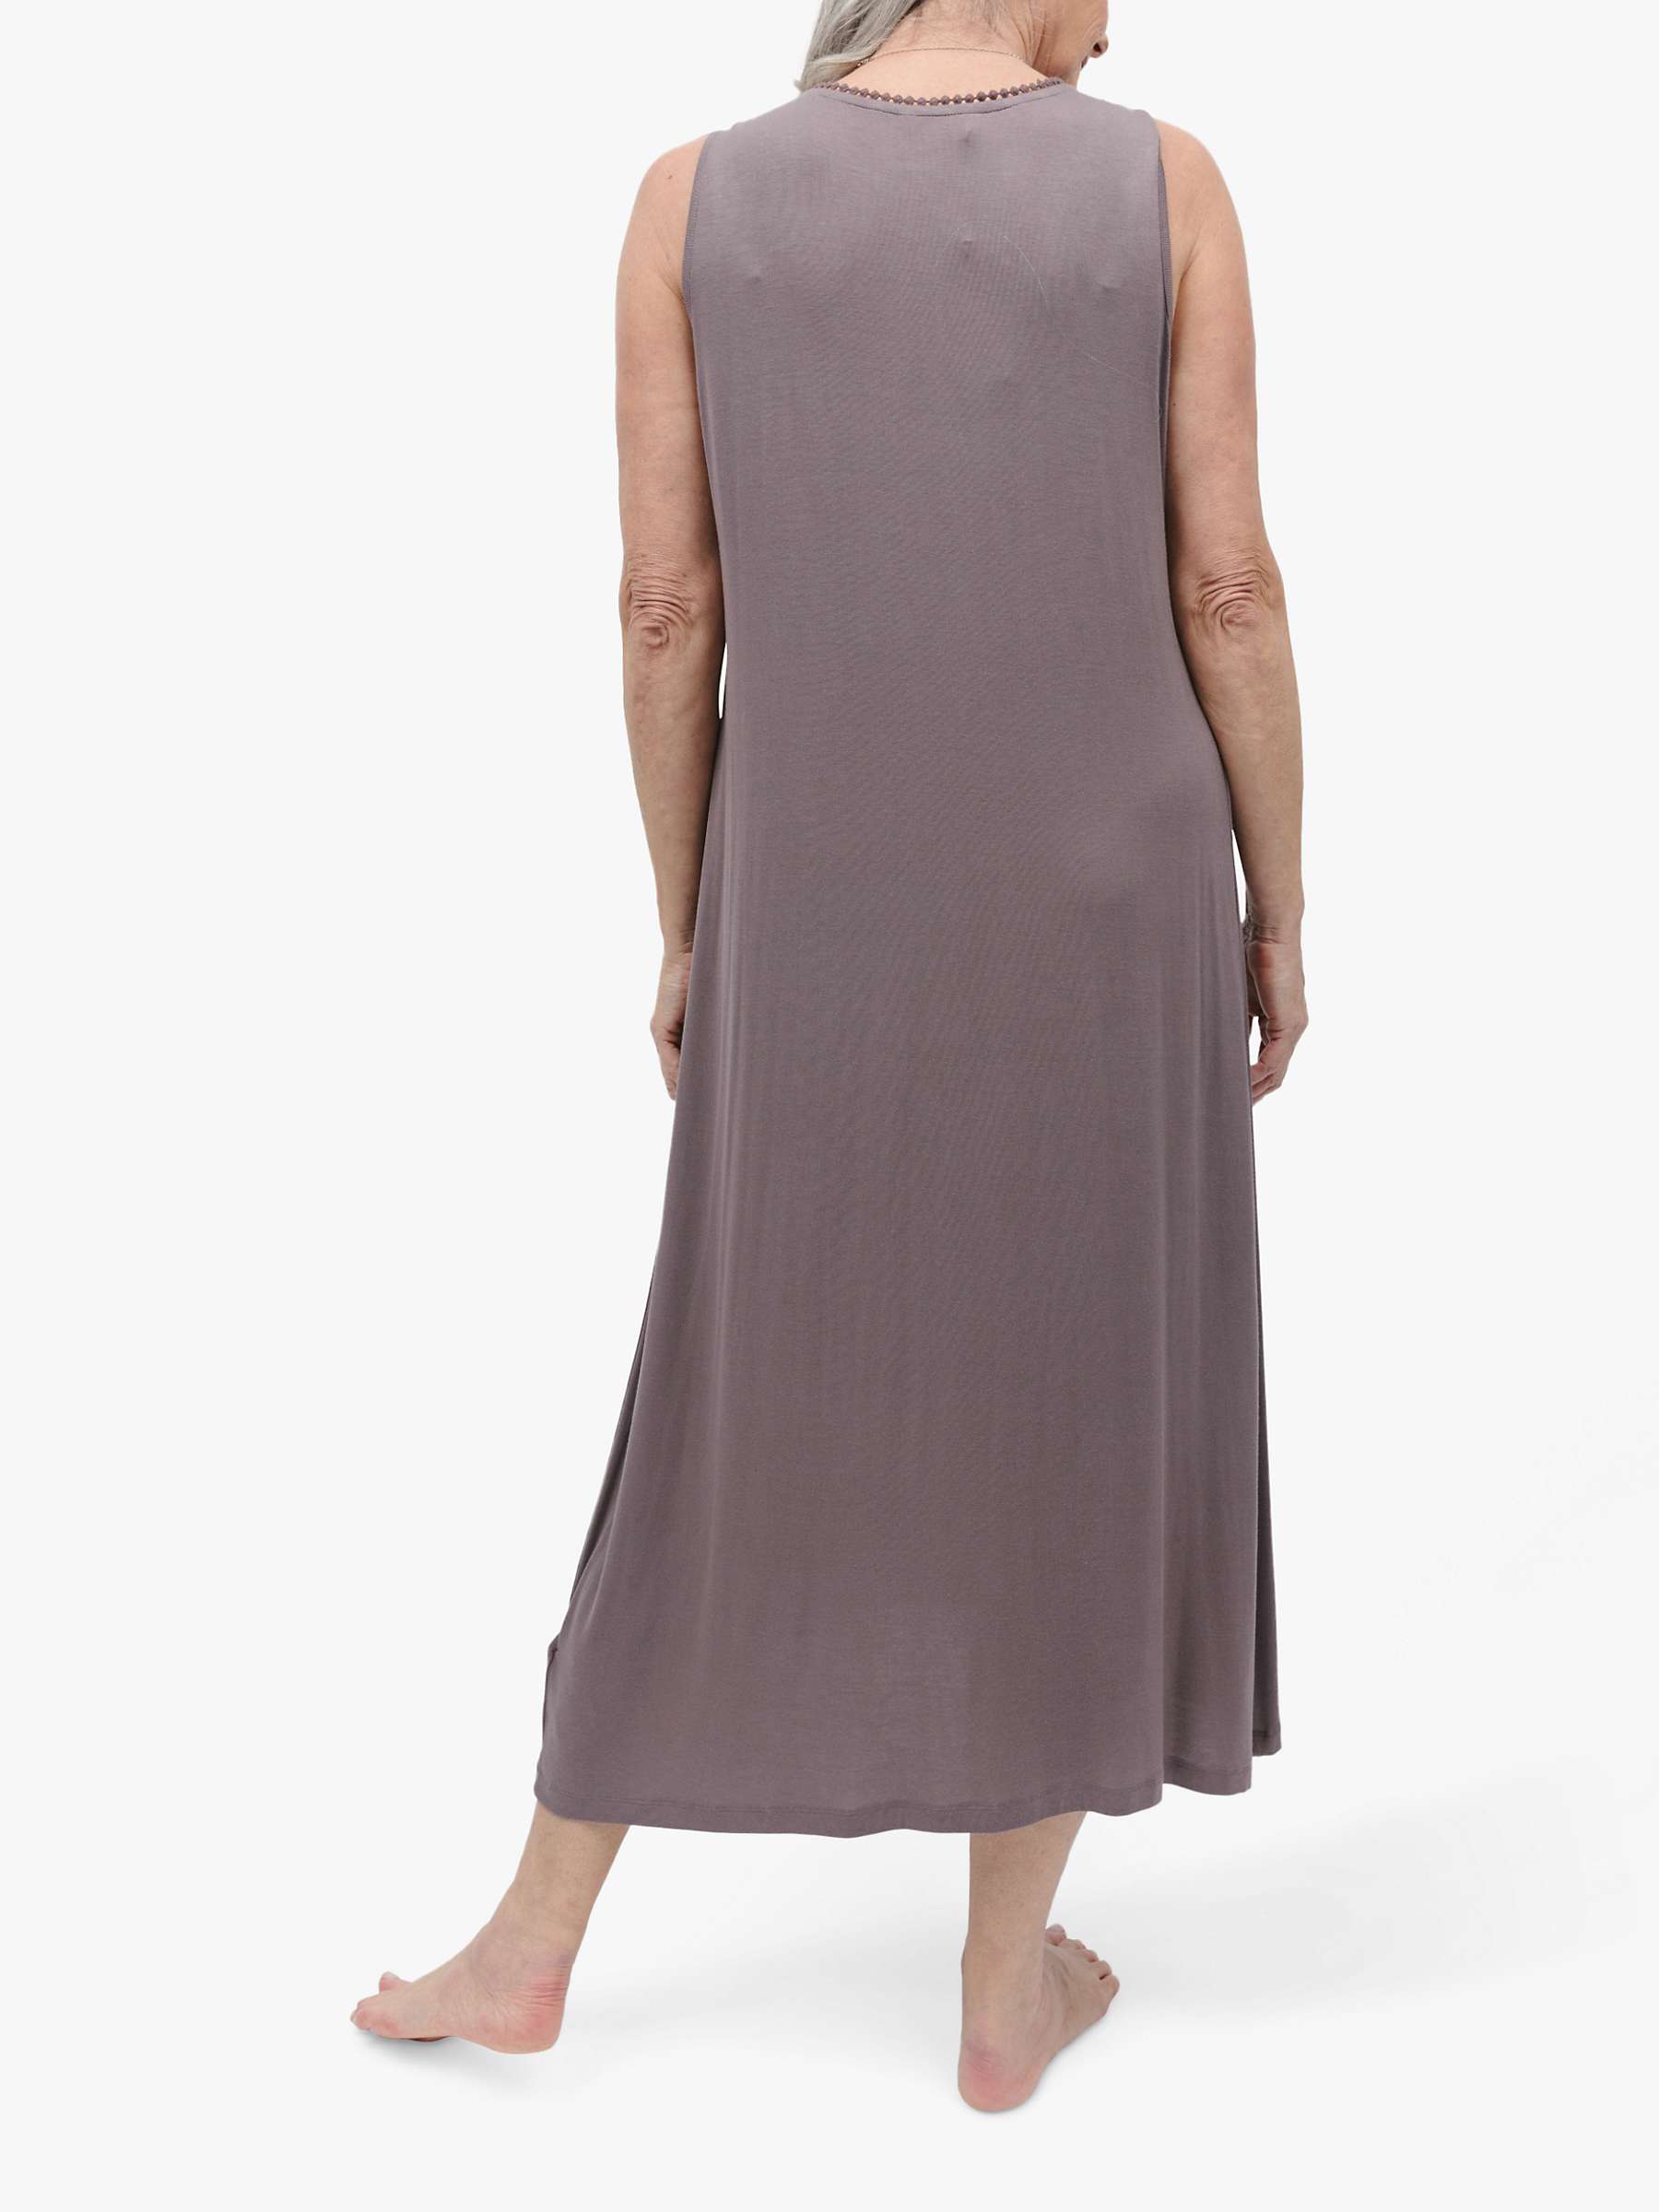 Buy Nora Rose by Cyberjammies Evette Lace Neck Long Nightdress, Taupe Online at johnlewis.com